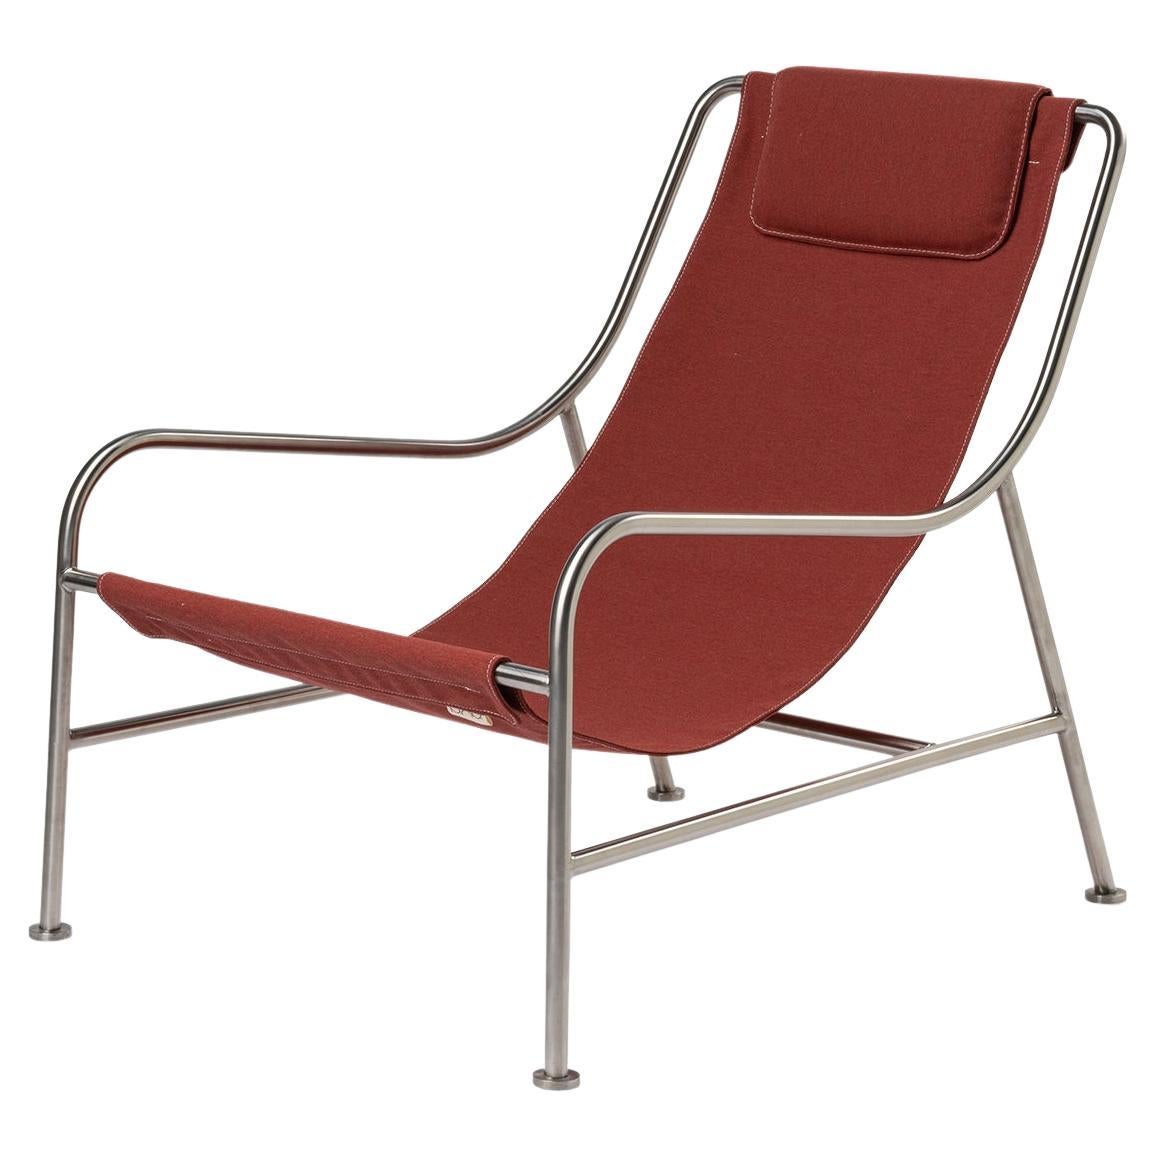 Minimalist Outdoor Lounge Chair in "Scarlet" Fabric and Brushed Stainless Steel For Sale